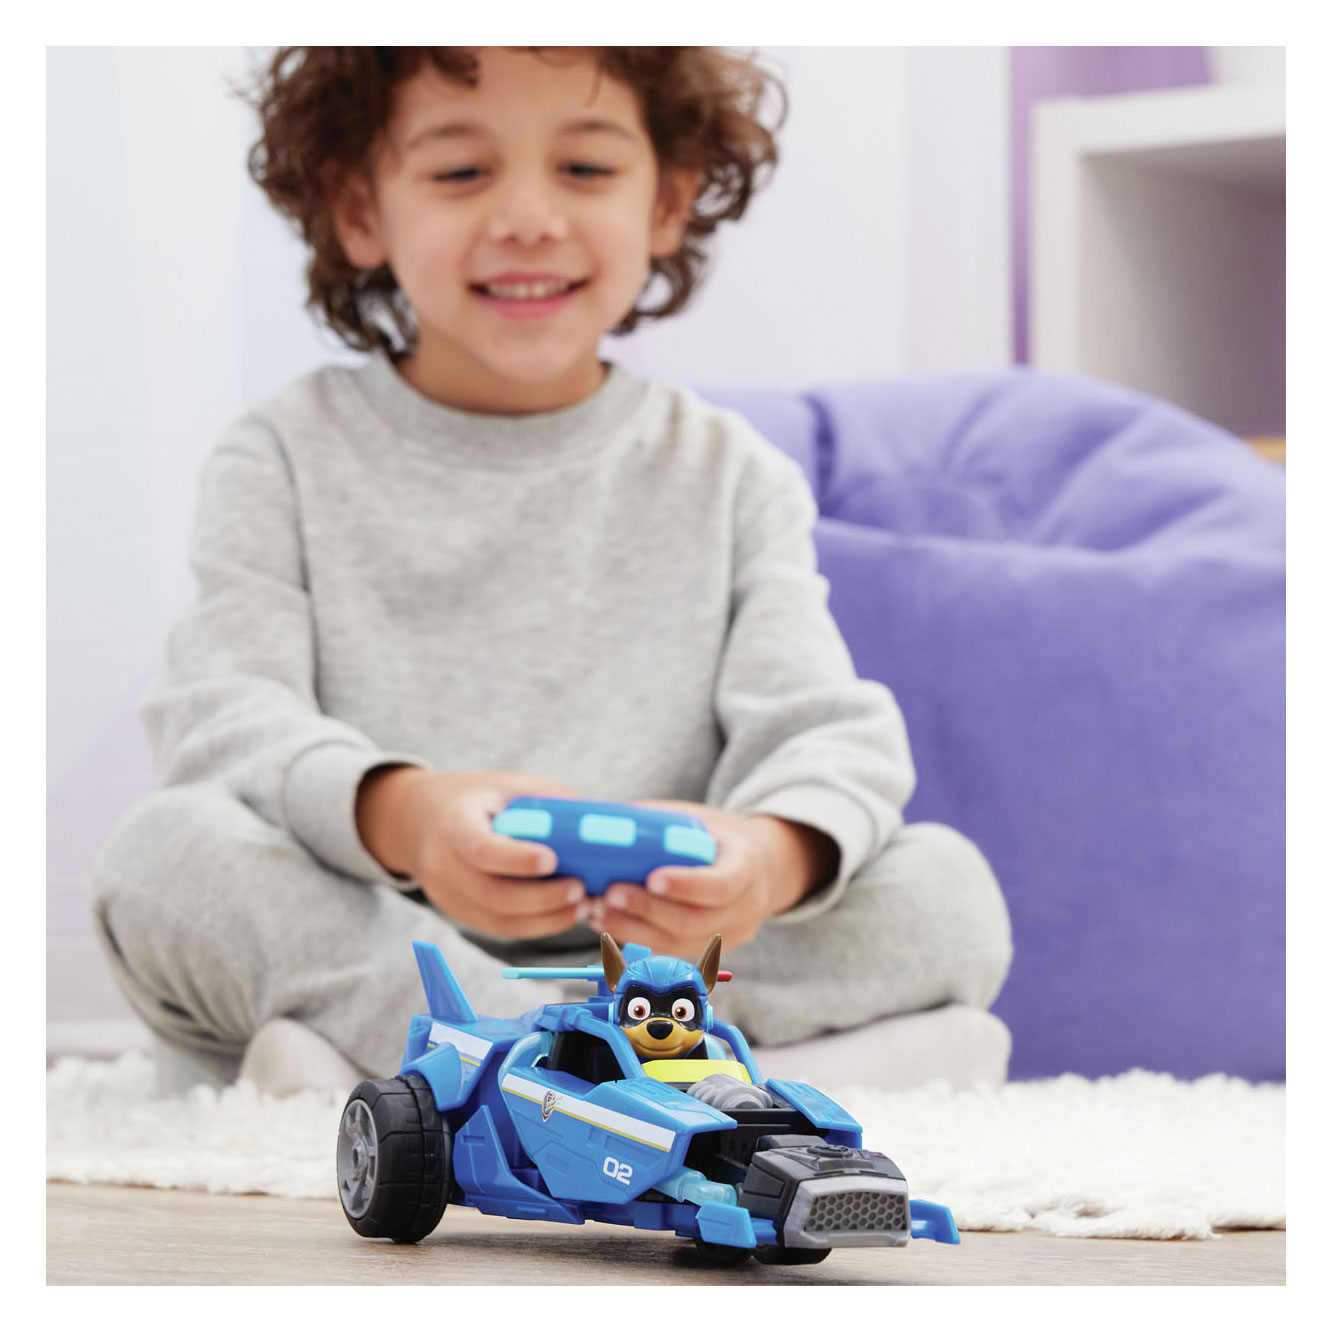 PAW Patrol - The Mighty Movie - Chase RC Vehicle